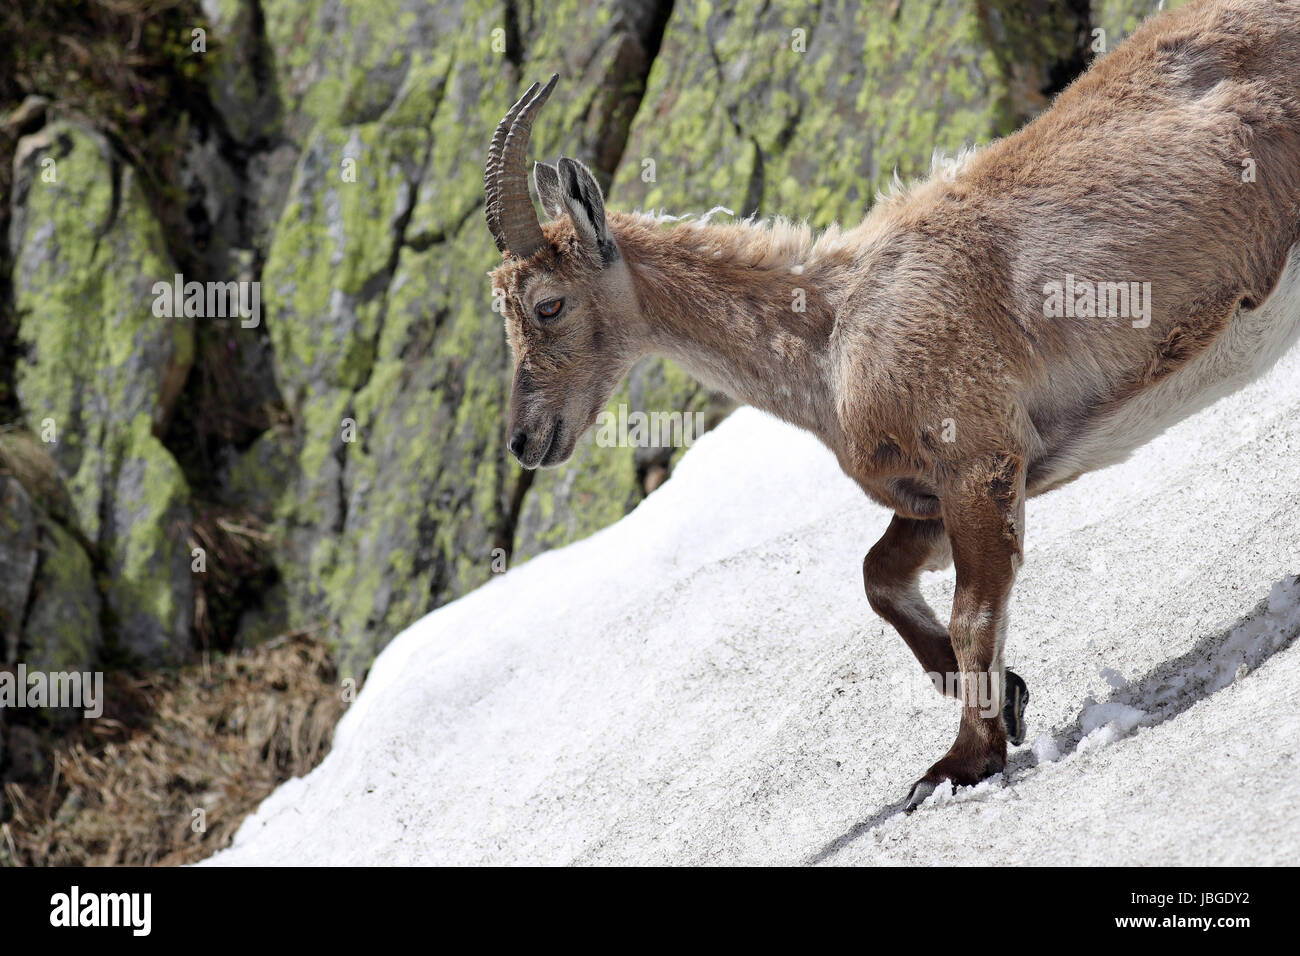 Ibex, Capra Ibex, walking down a steep snowy slope against mountain cliffs covered in lichens Stock Photo